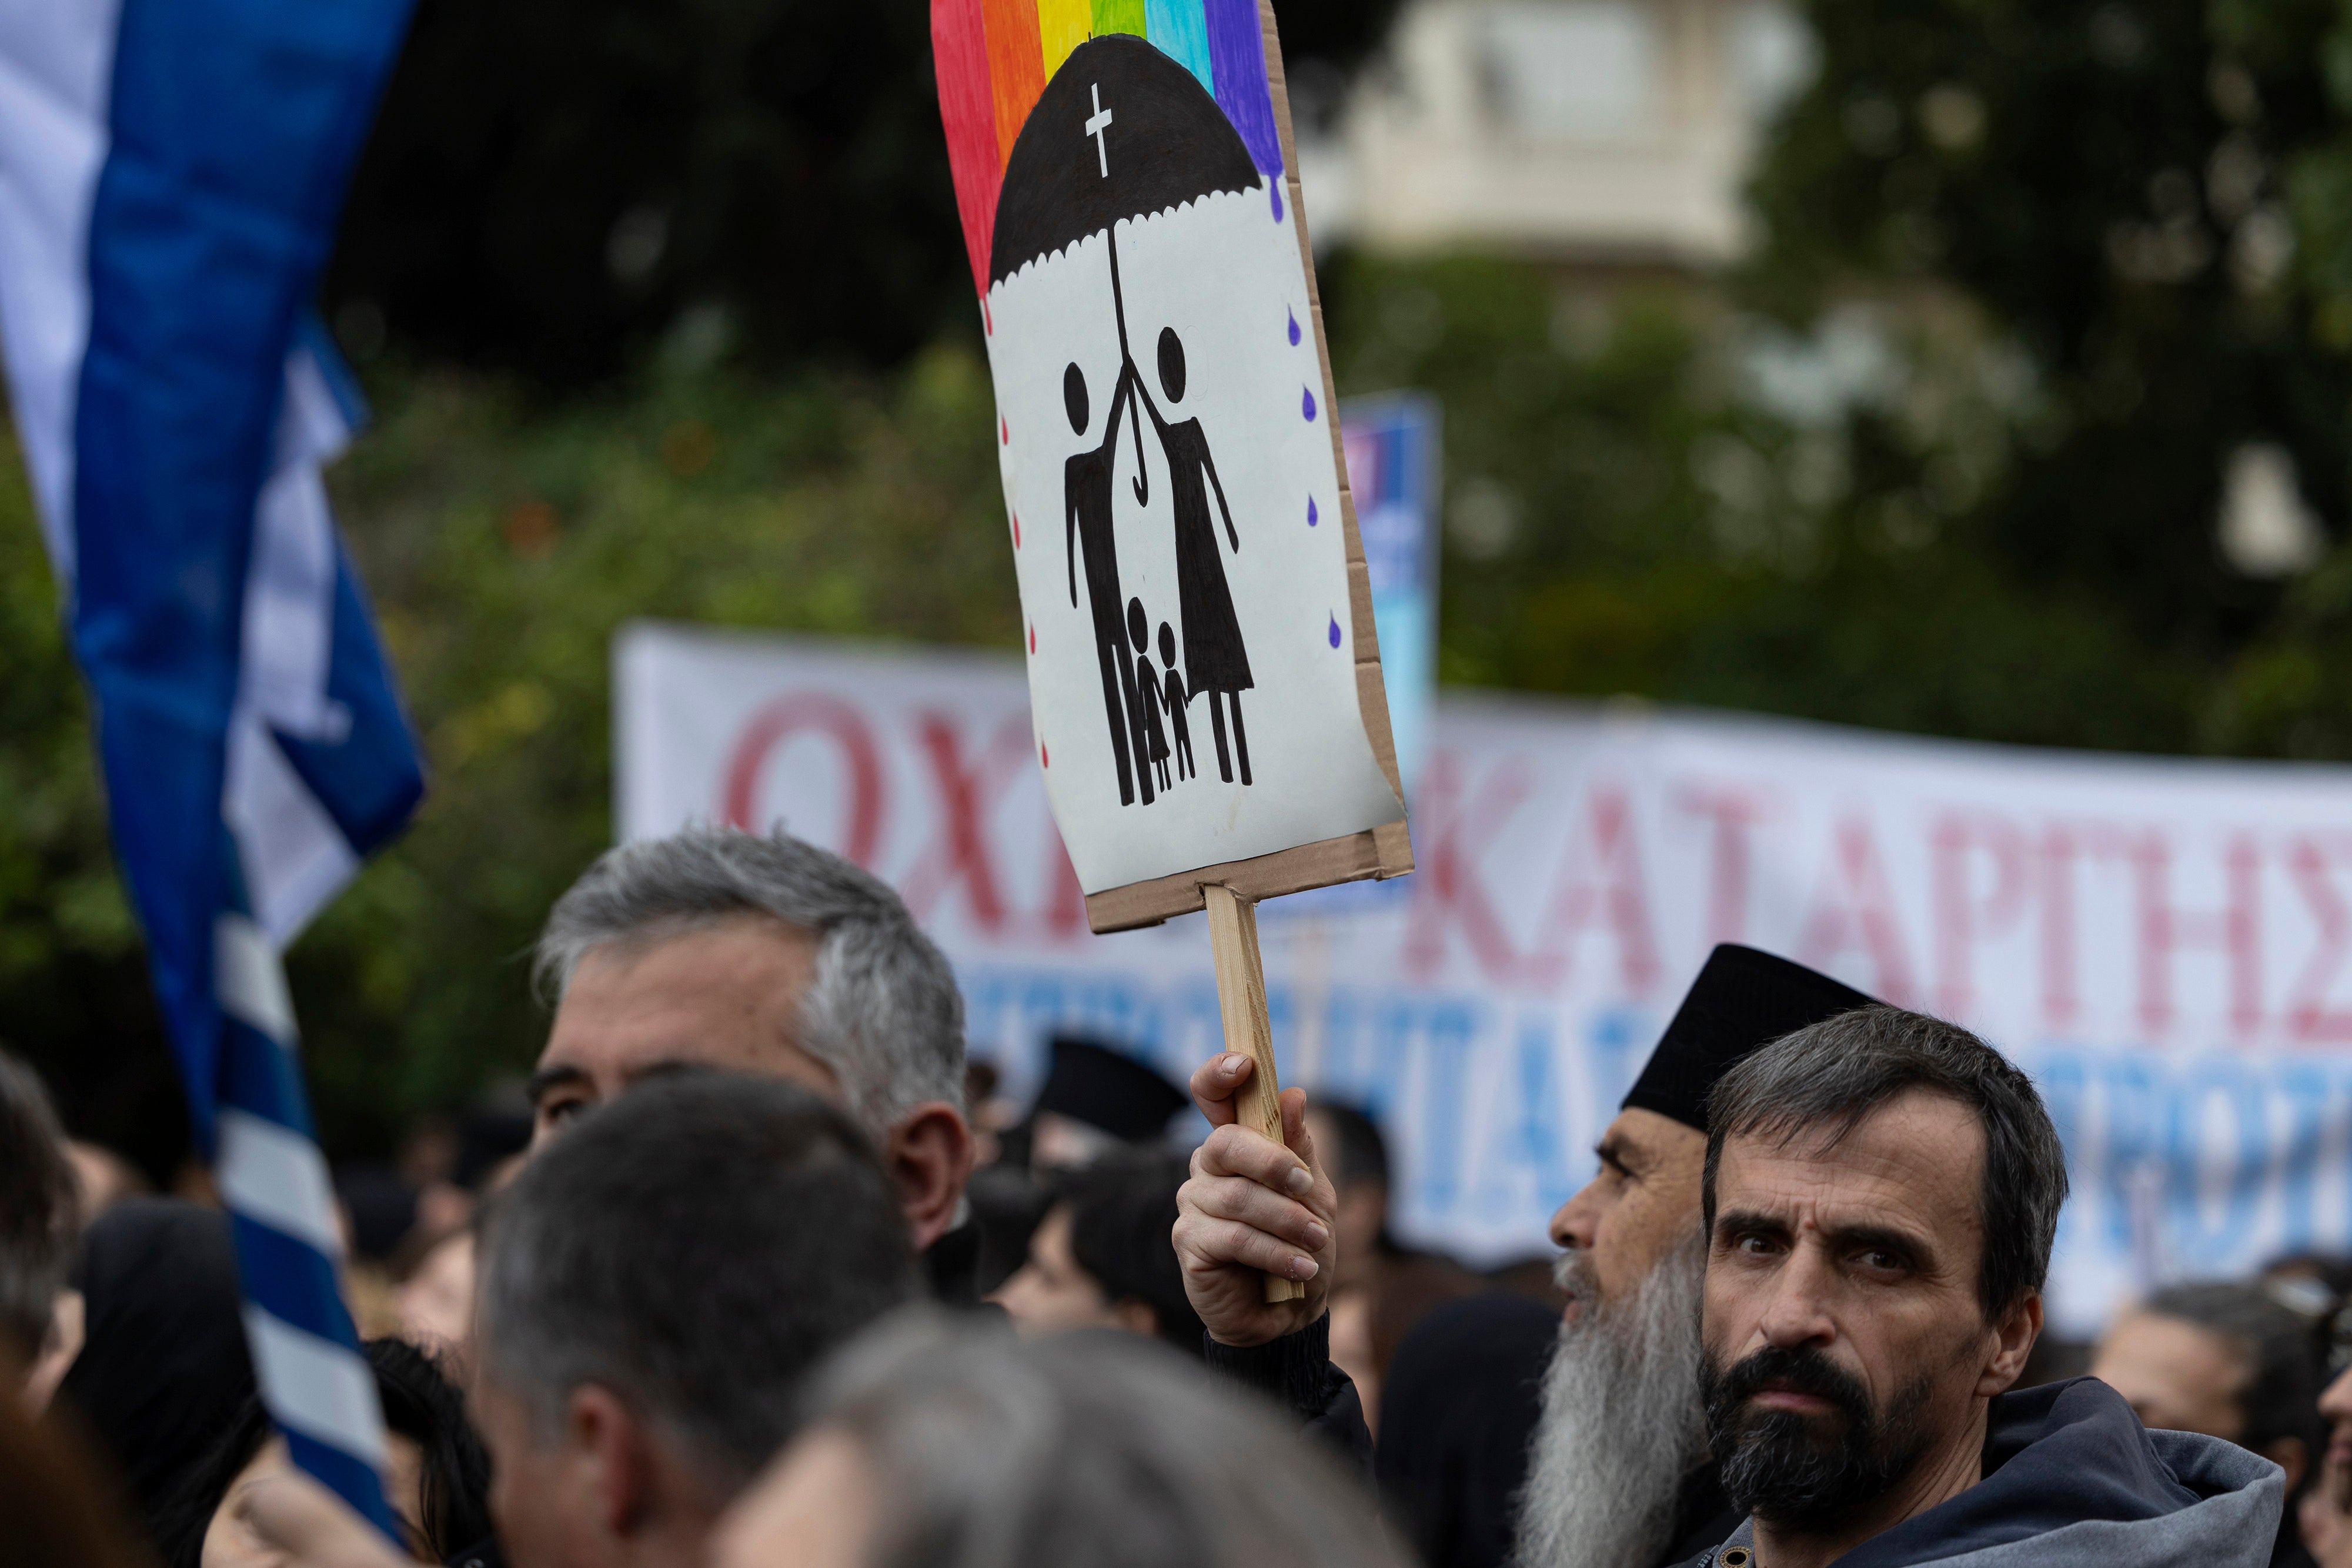 FILE - A protester raises a banner during a rally against same-sex marriage, at central Syntagma square, in Athens